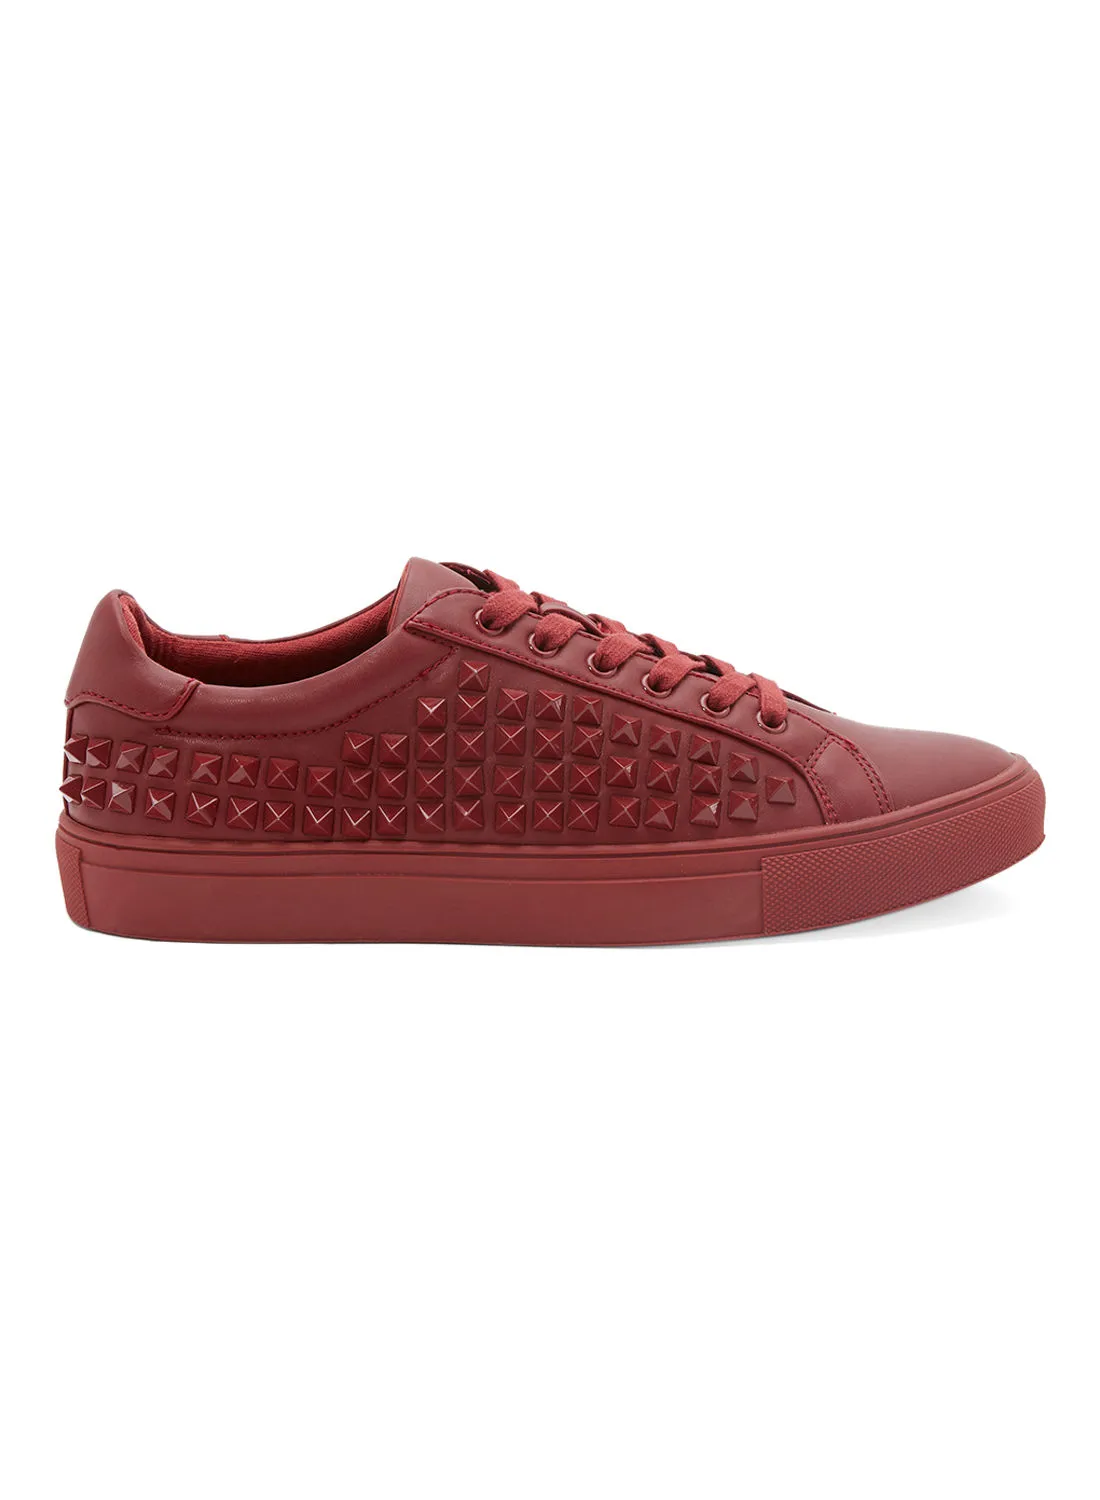 STEVE MADDEN Atticus Sneakers Red